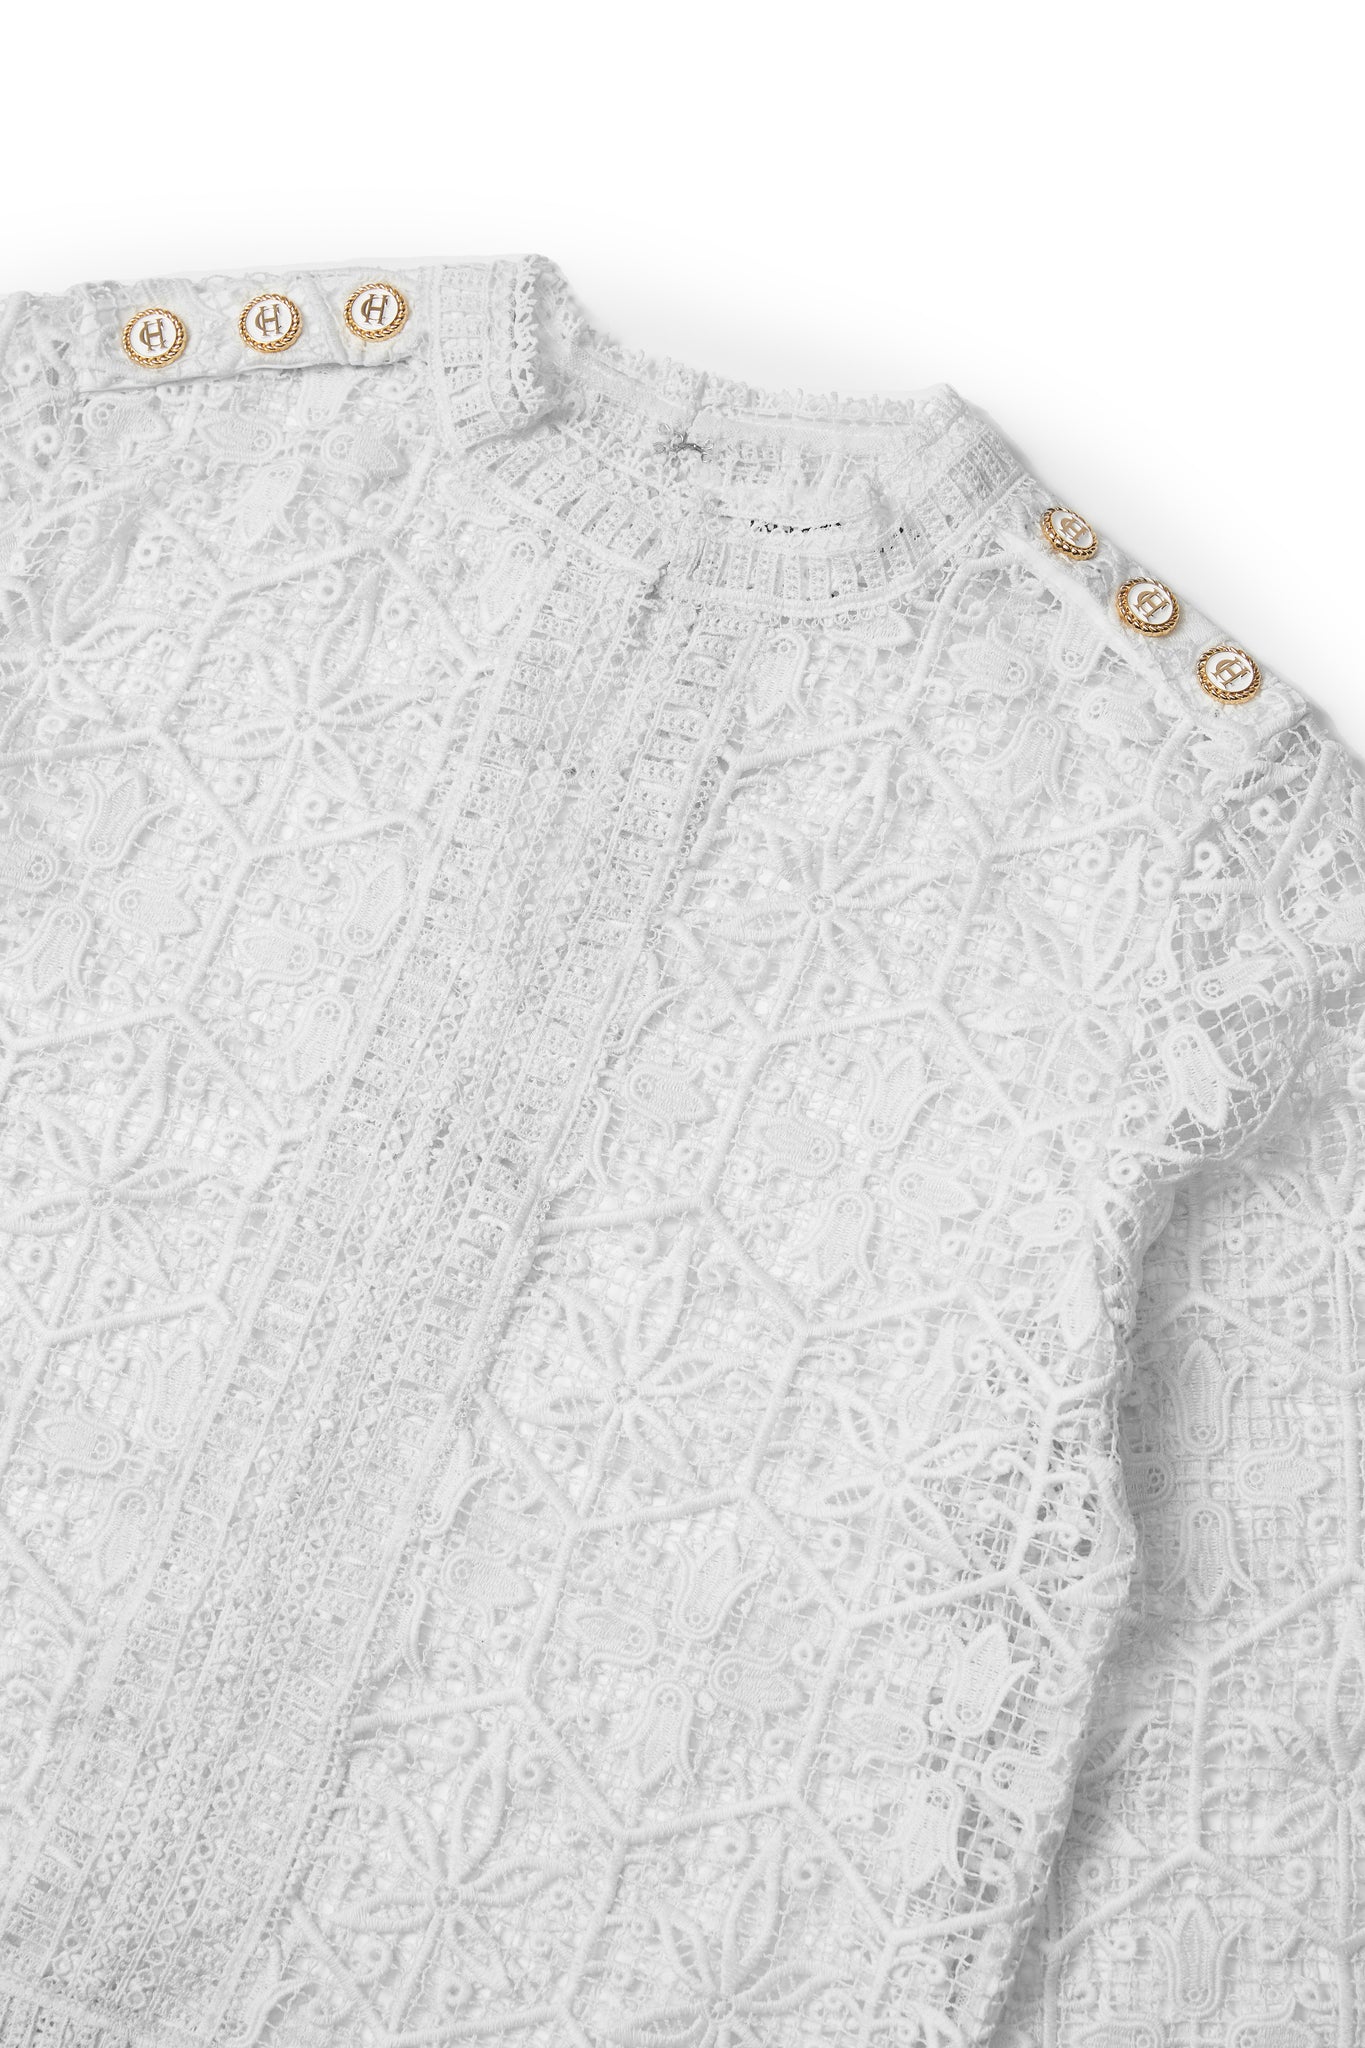 detail of lace crew neckline and holland cooper hardware on the shoulders